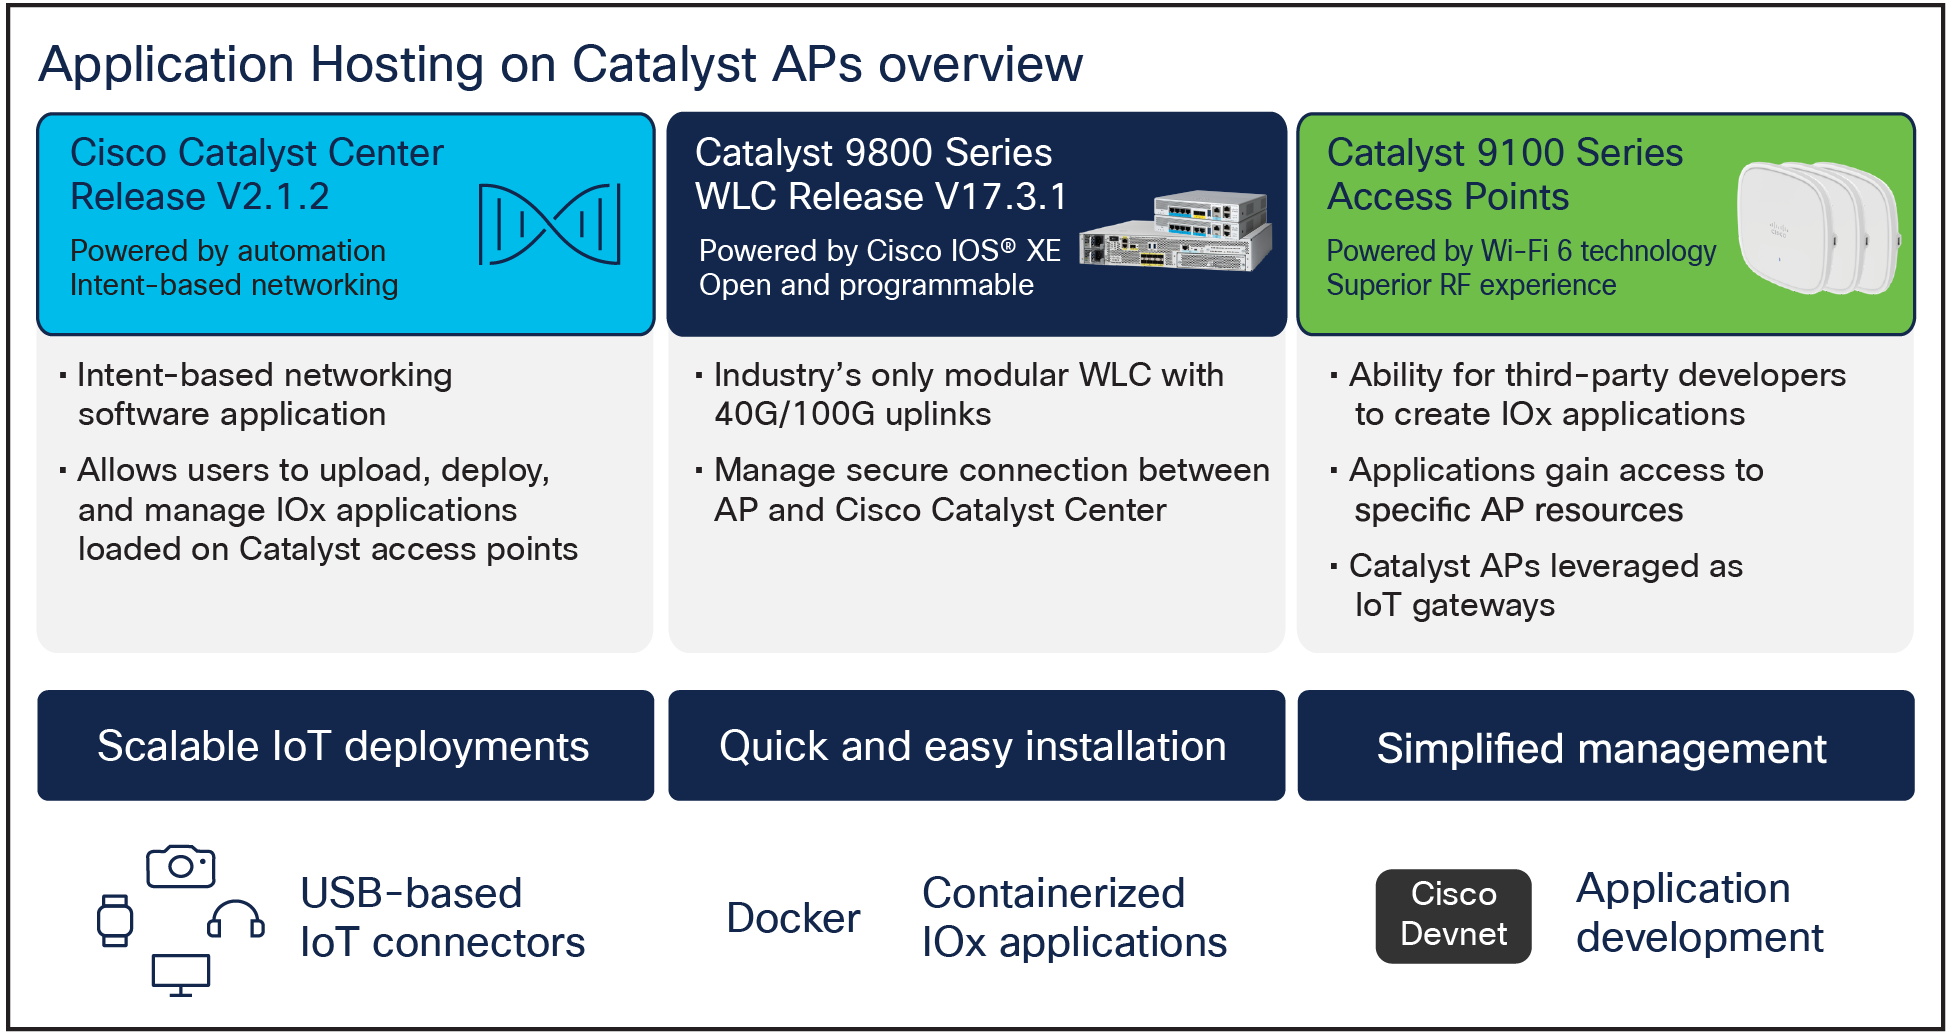 Overview of Application Hosting on Catalyst Access Points